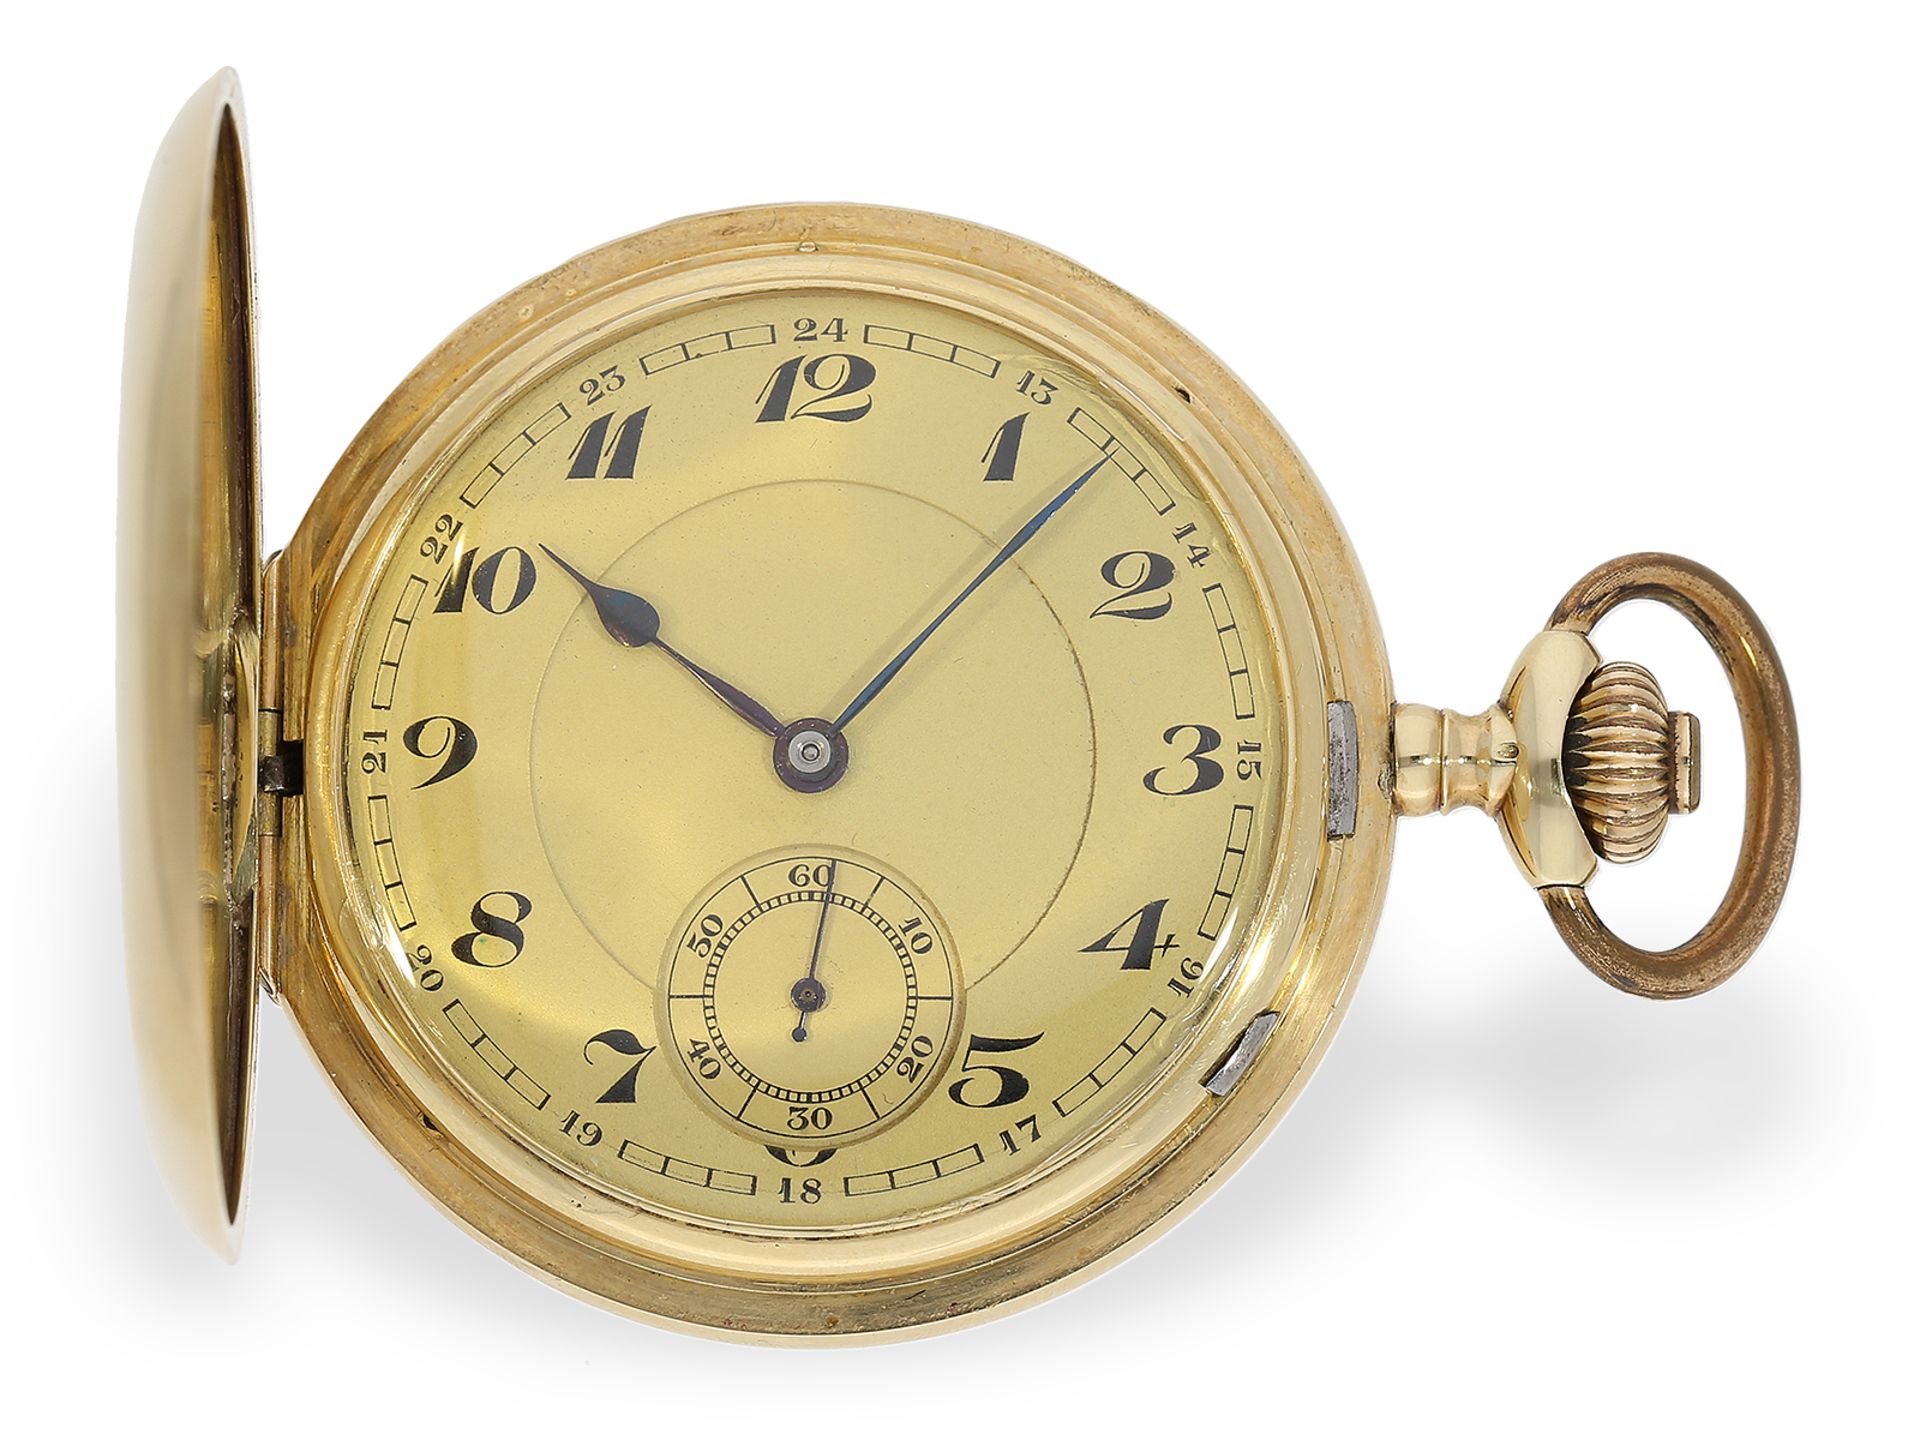 Very well preserved gold hunting case watch, ca. 1920